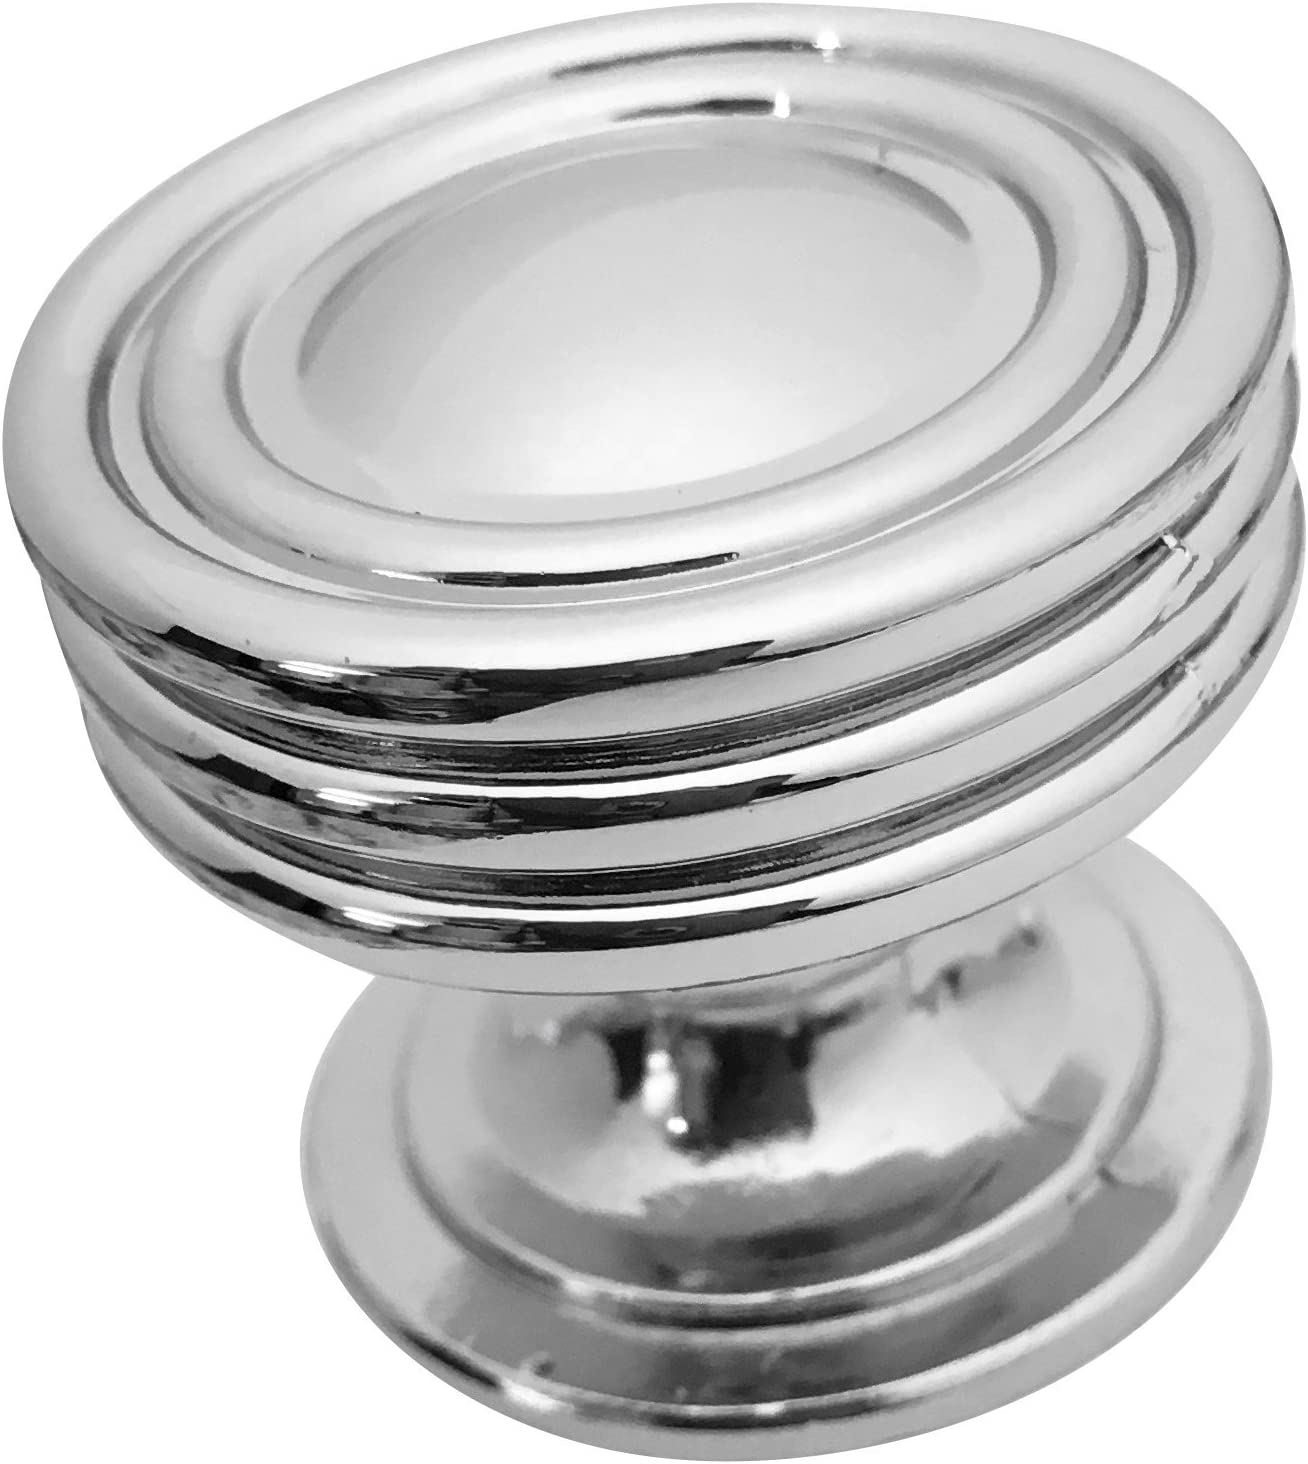 Polished Chrome Cabinet Knob by Southern Hills, Round Cabinet Knobs, 1 1/4 Inch Diameter, Pack of 5 Knobs, Chrome Cabinet Knobs, Cupboard Knobs, Kitchen Cabinet Knobs Chrome, SHKM008-CHR-5 - image 1 of 3